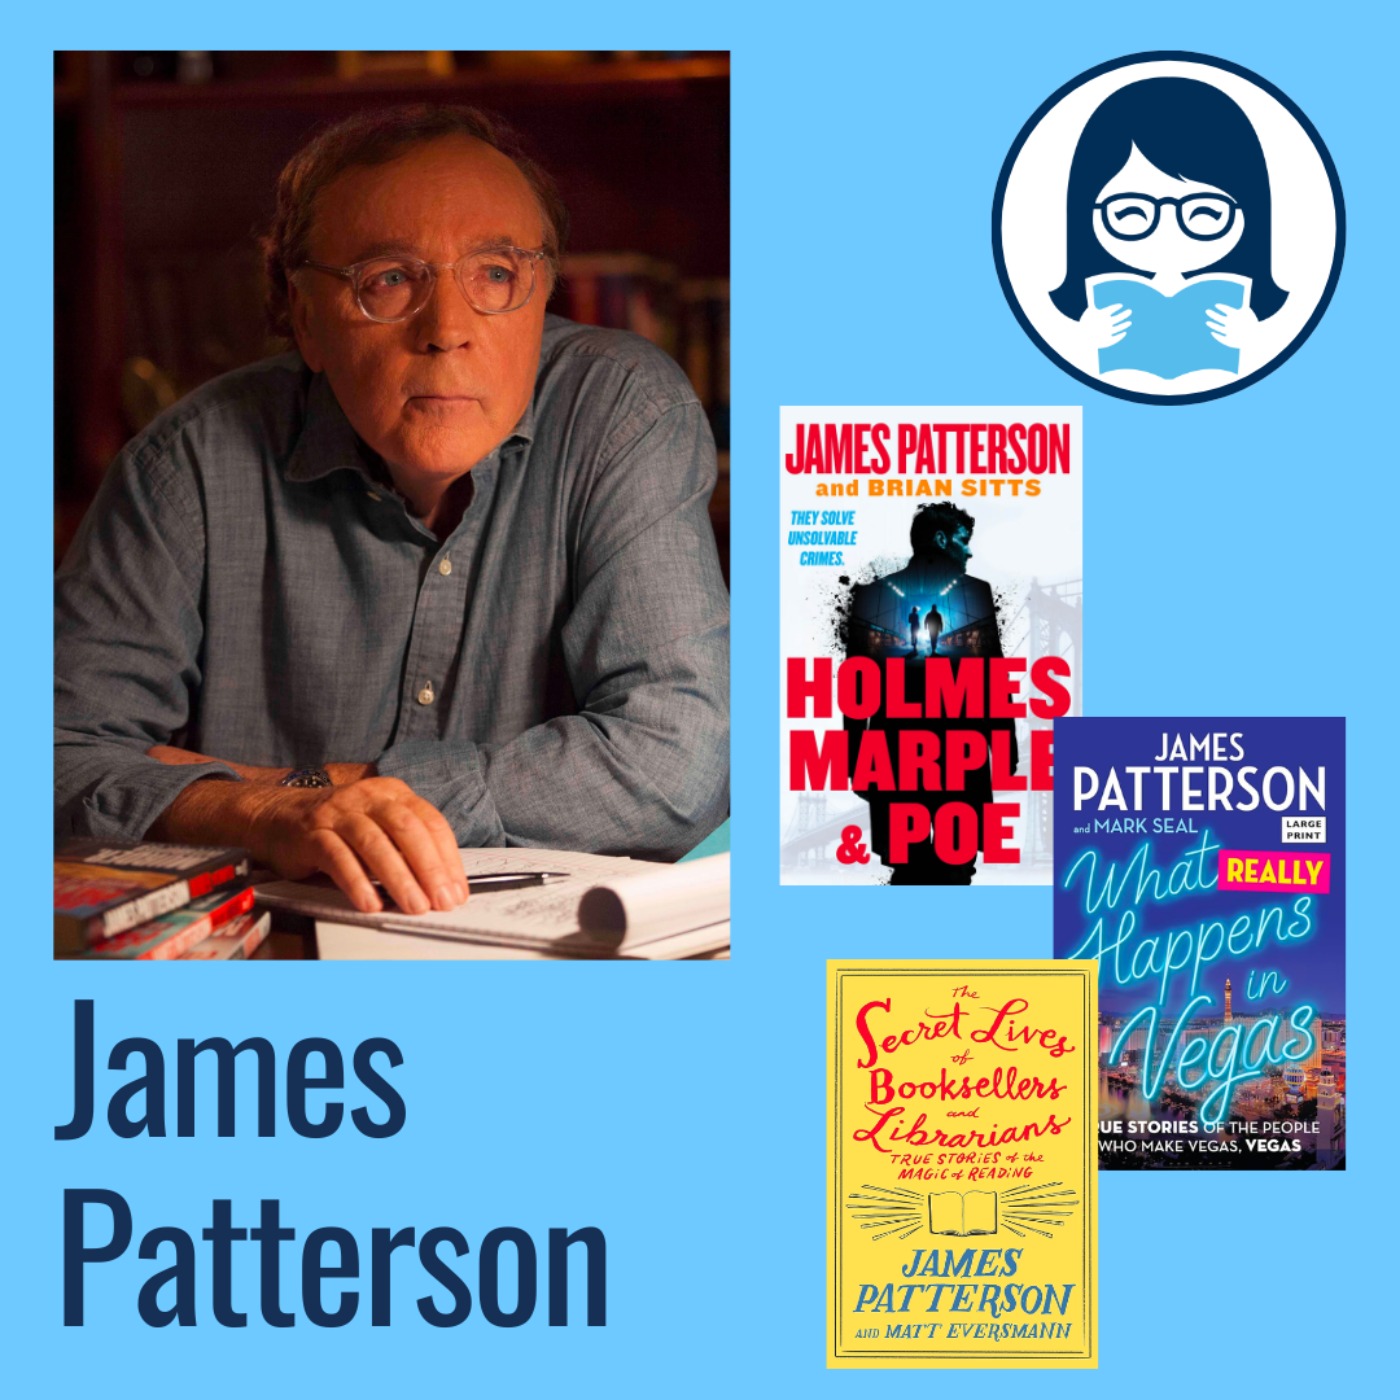 James Patterson, HOLMES, MARPLE & POE + WHAT REALLY HAPPENS IN VEGAS: True Stories of the People Who Make Vegas, Vegas + THE SECRET LIVES OF BOOKSELLERS AND LIBRARIANS: Their Stories Are Better Than t